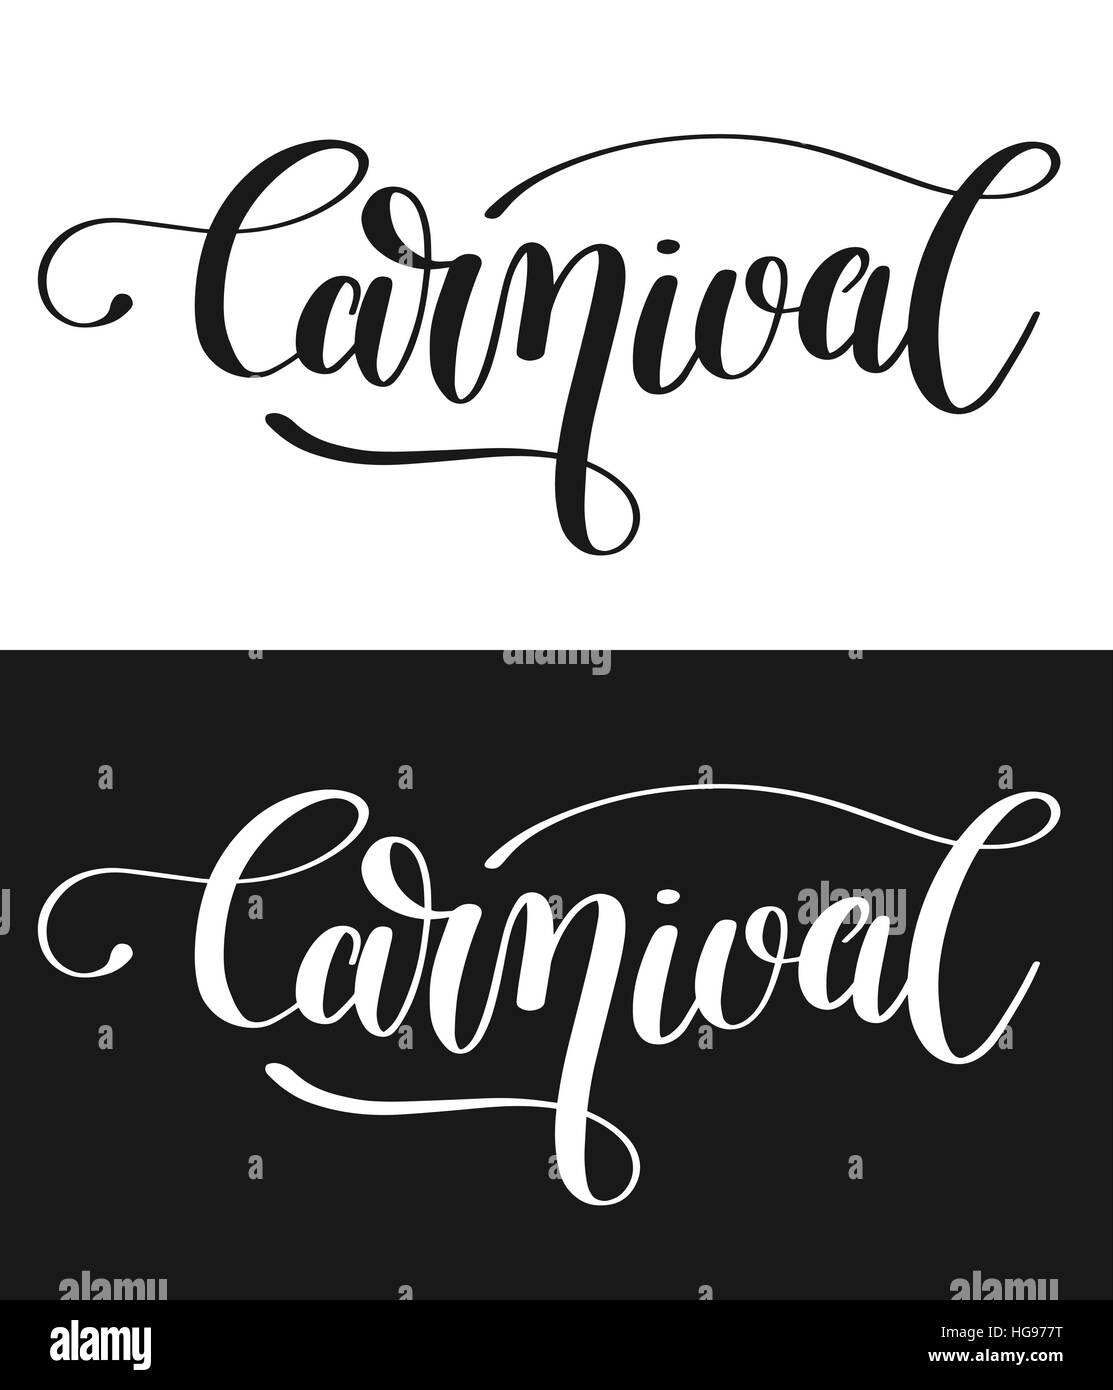 carnival hand lettering inscription isolated on white background Stock Vector